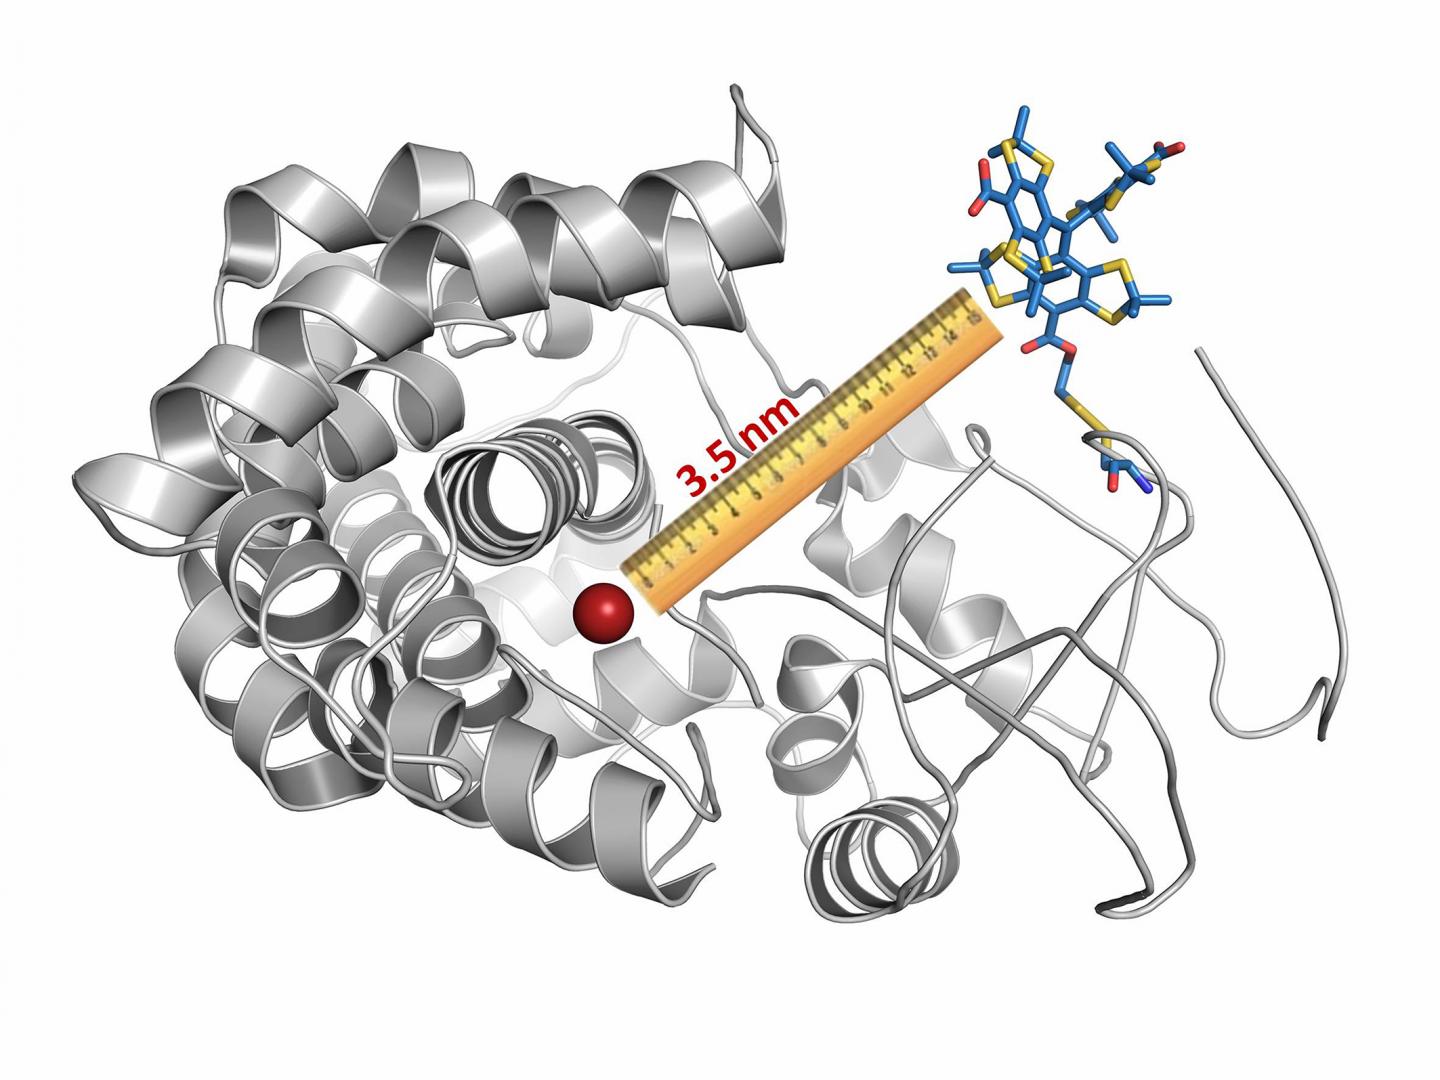 Bonn-Based Scientists Fitted a Cytochrome Molecule with a Magnetic Label